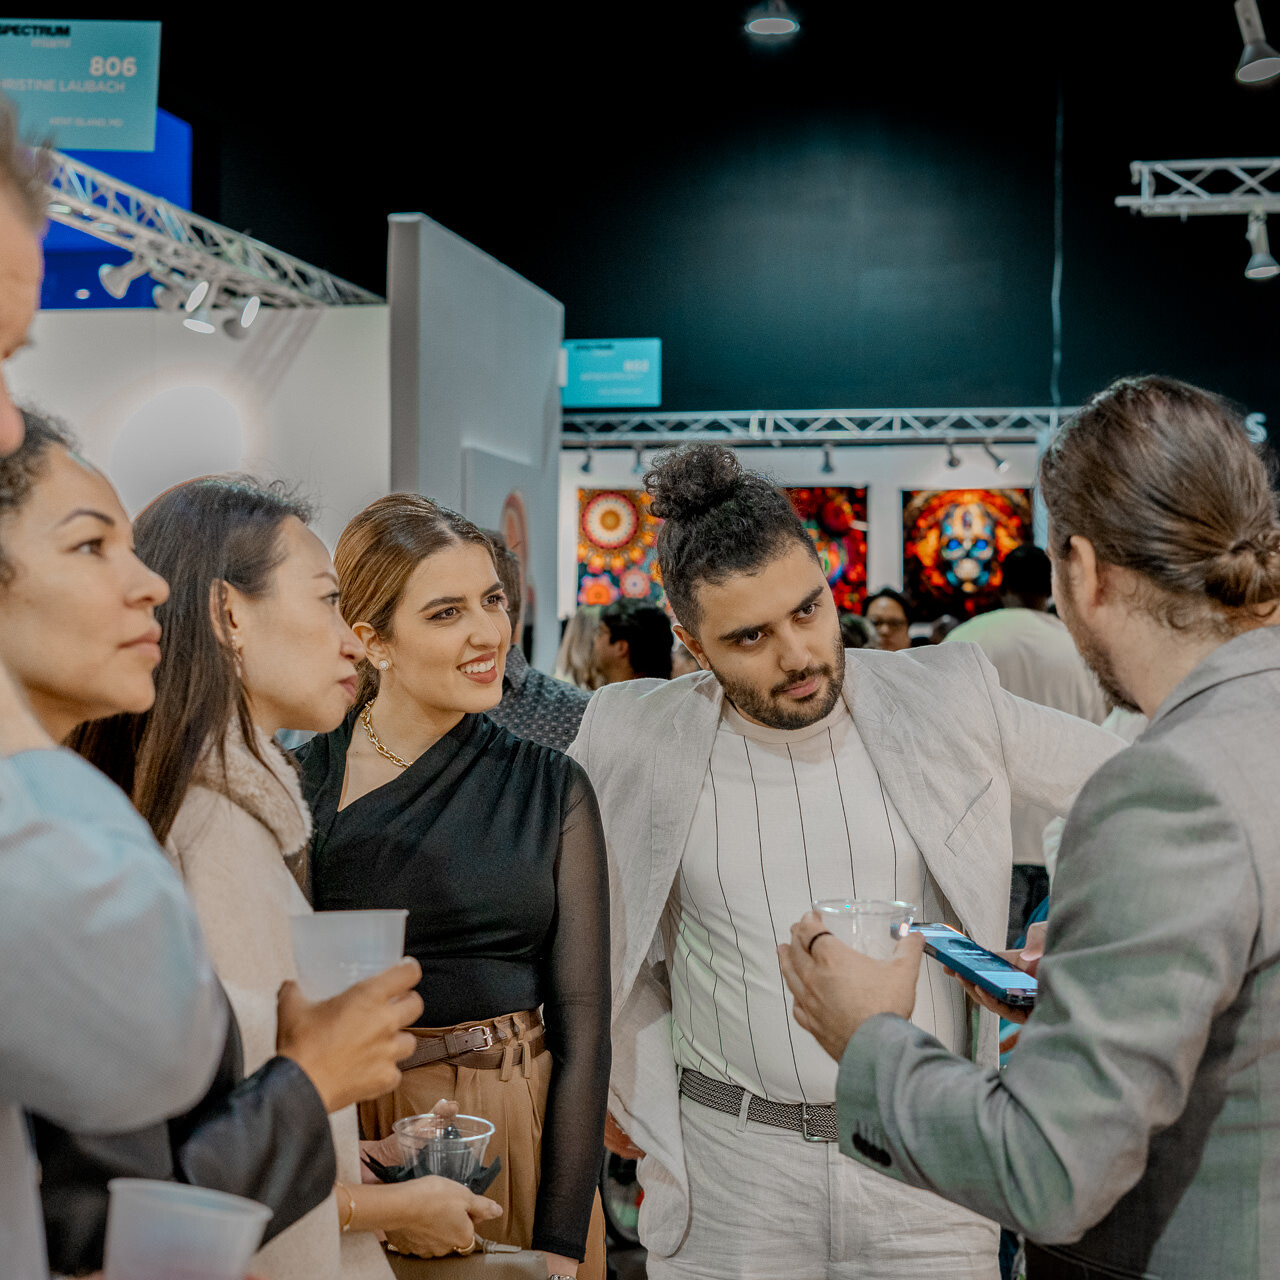 Alex Righetto in conversation with a group of attendees at the Spectrum Miami art fair, discussing his creative process.